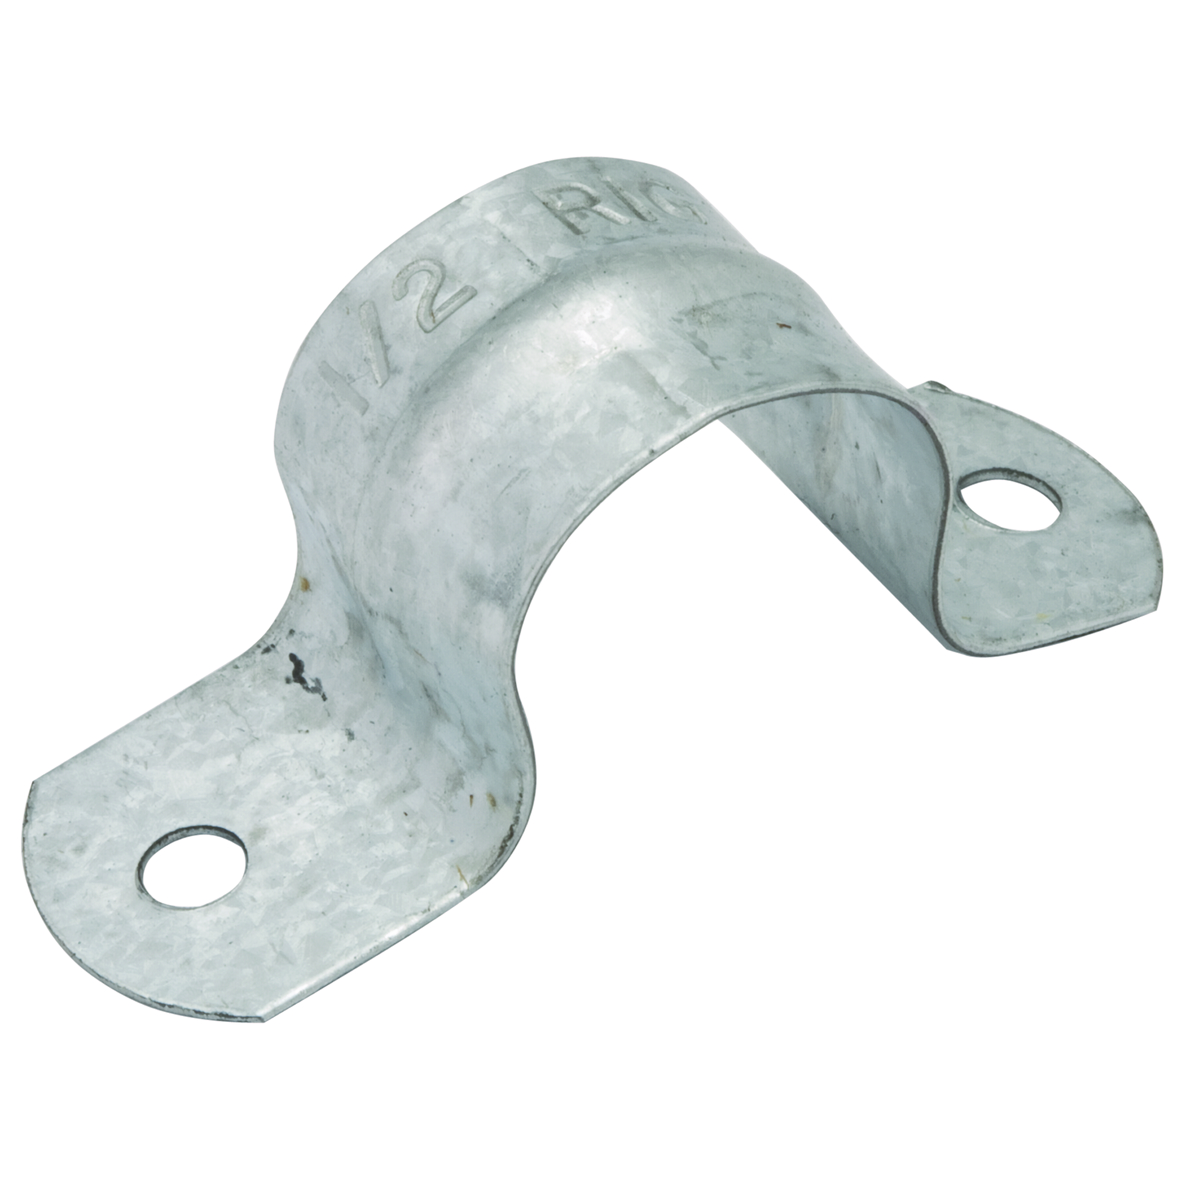 Two Hole Straps Stamped Steel, 1-1/2 In. Trade Size RGD/IMC/FLEX 2-HOLE 1-1/2 IN